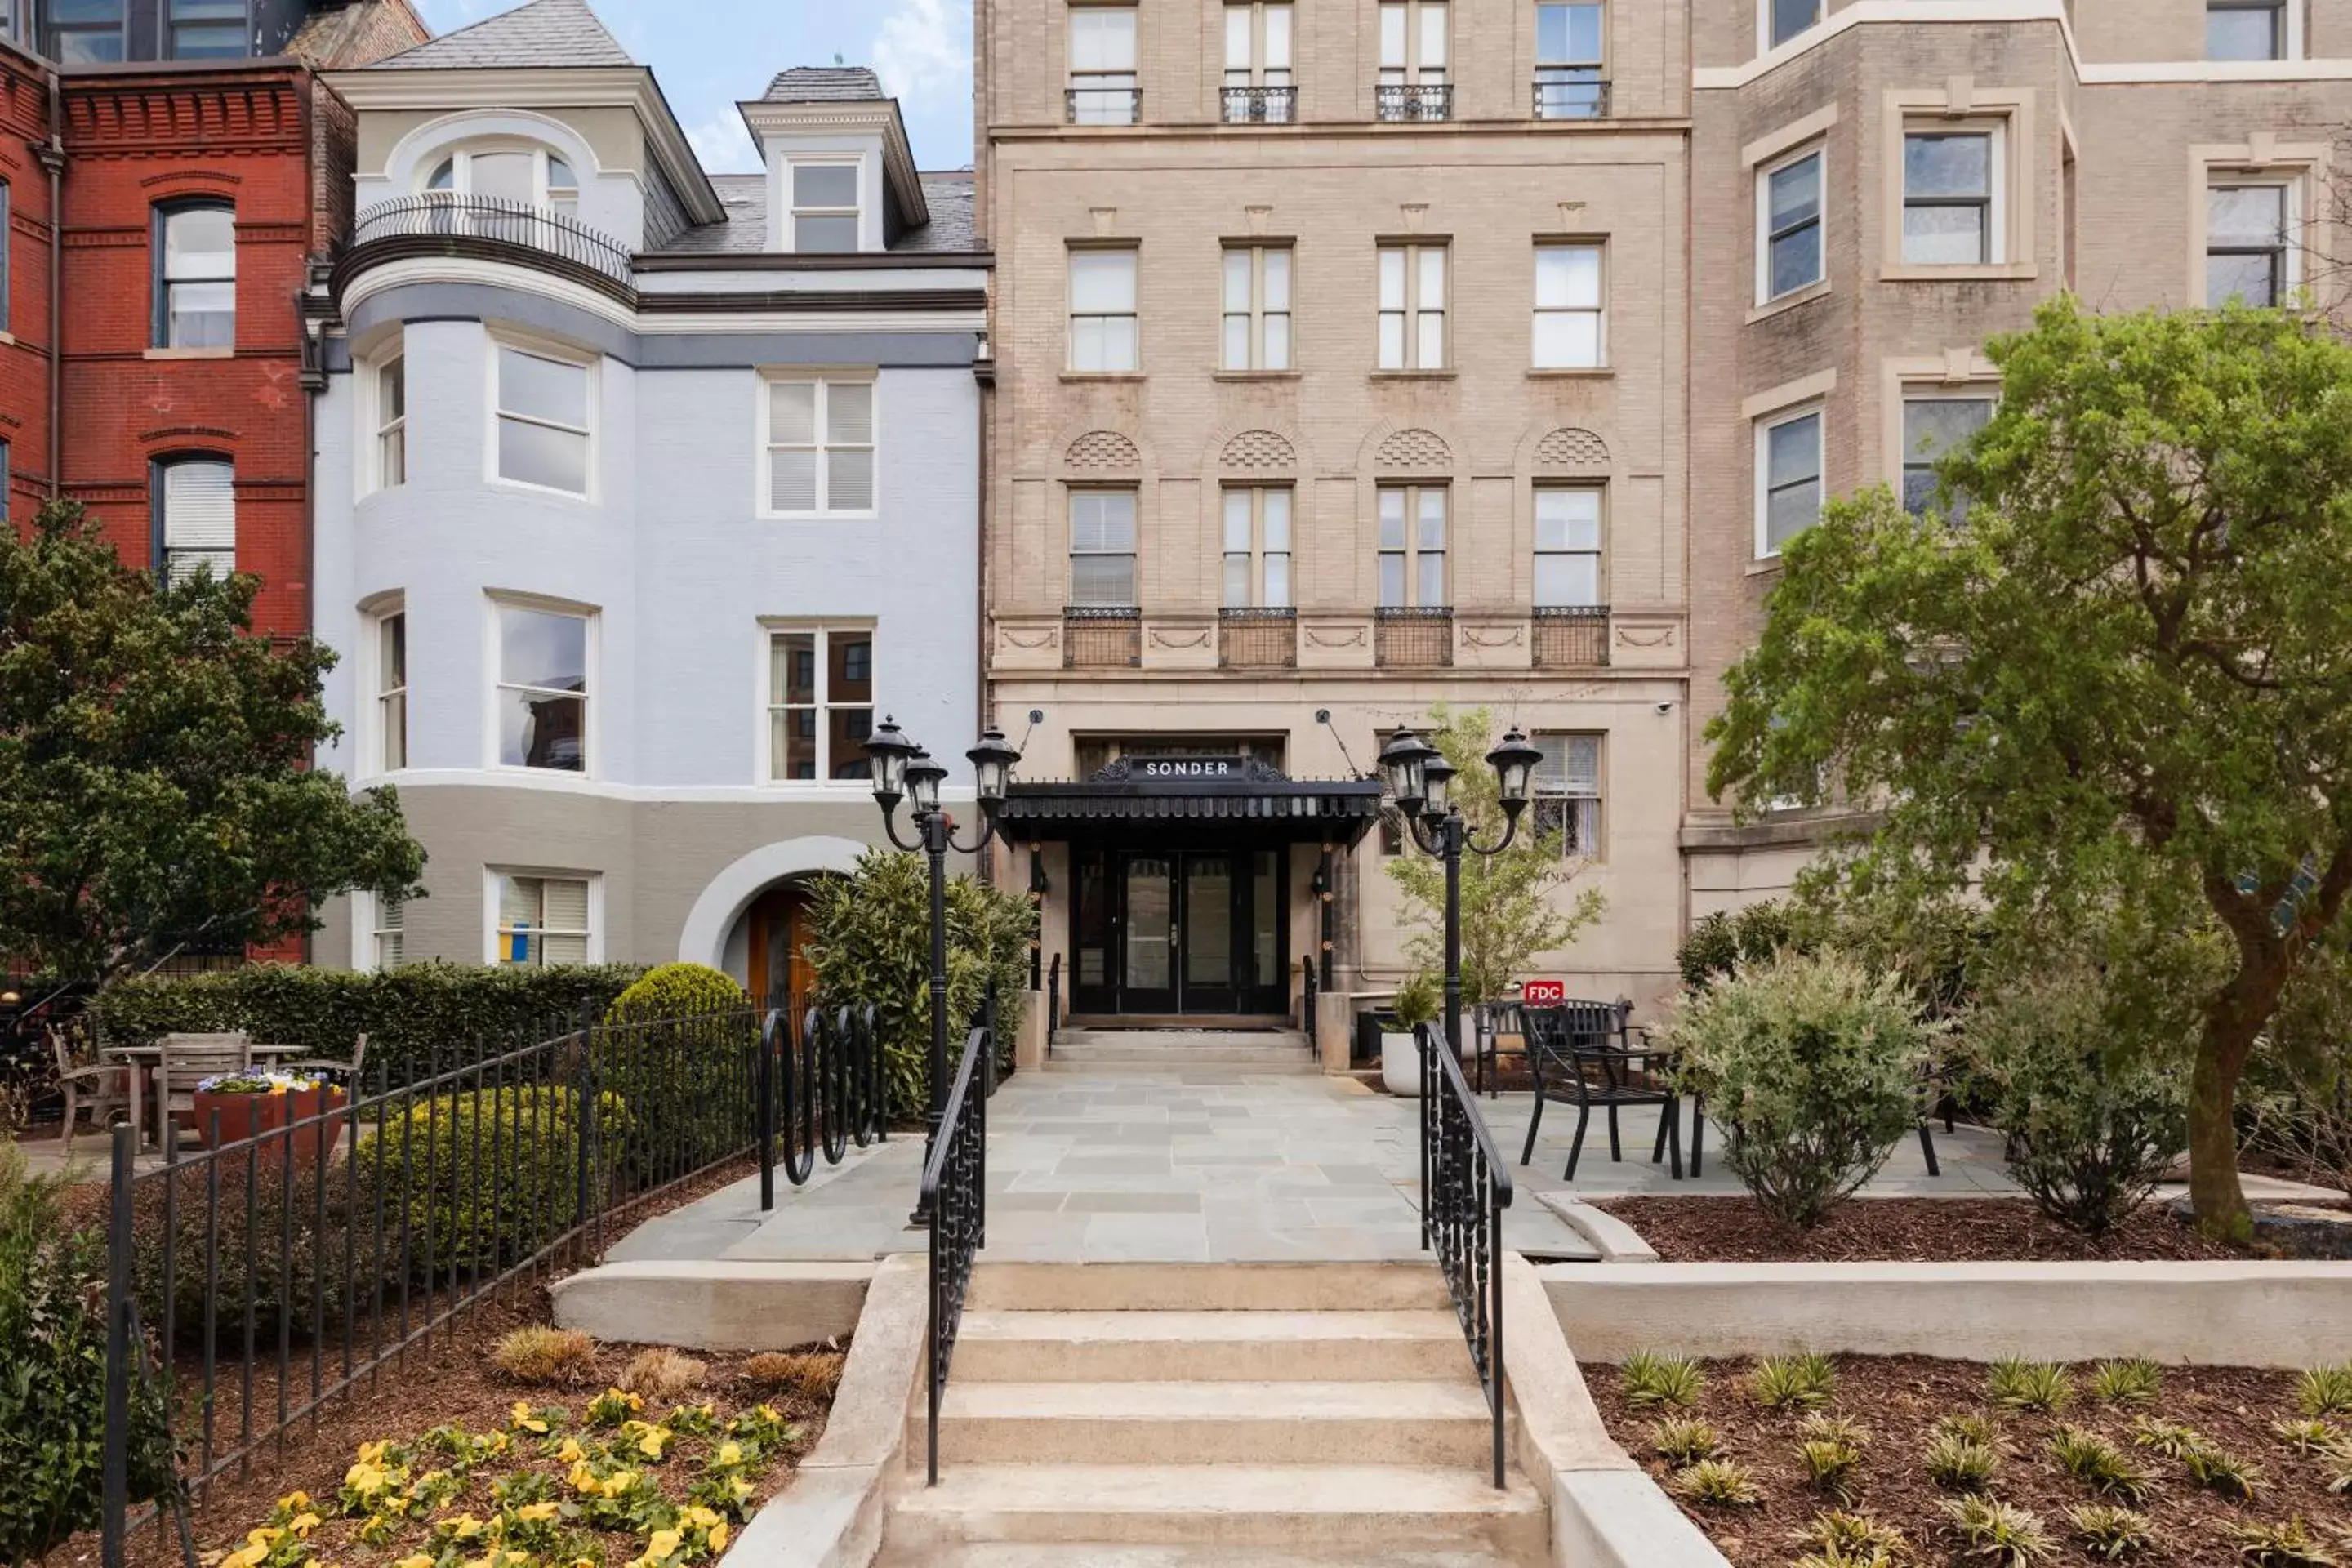 Property Building in Found Dupont Circle powered by Sonder